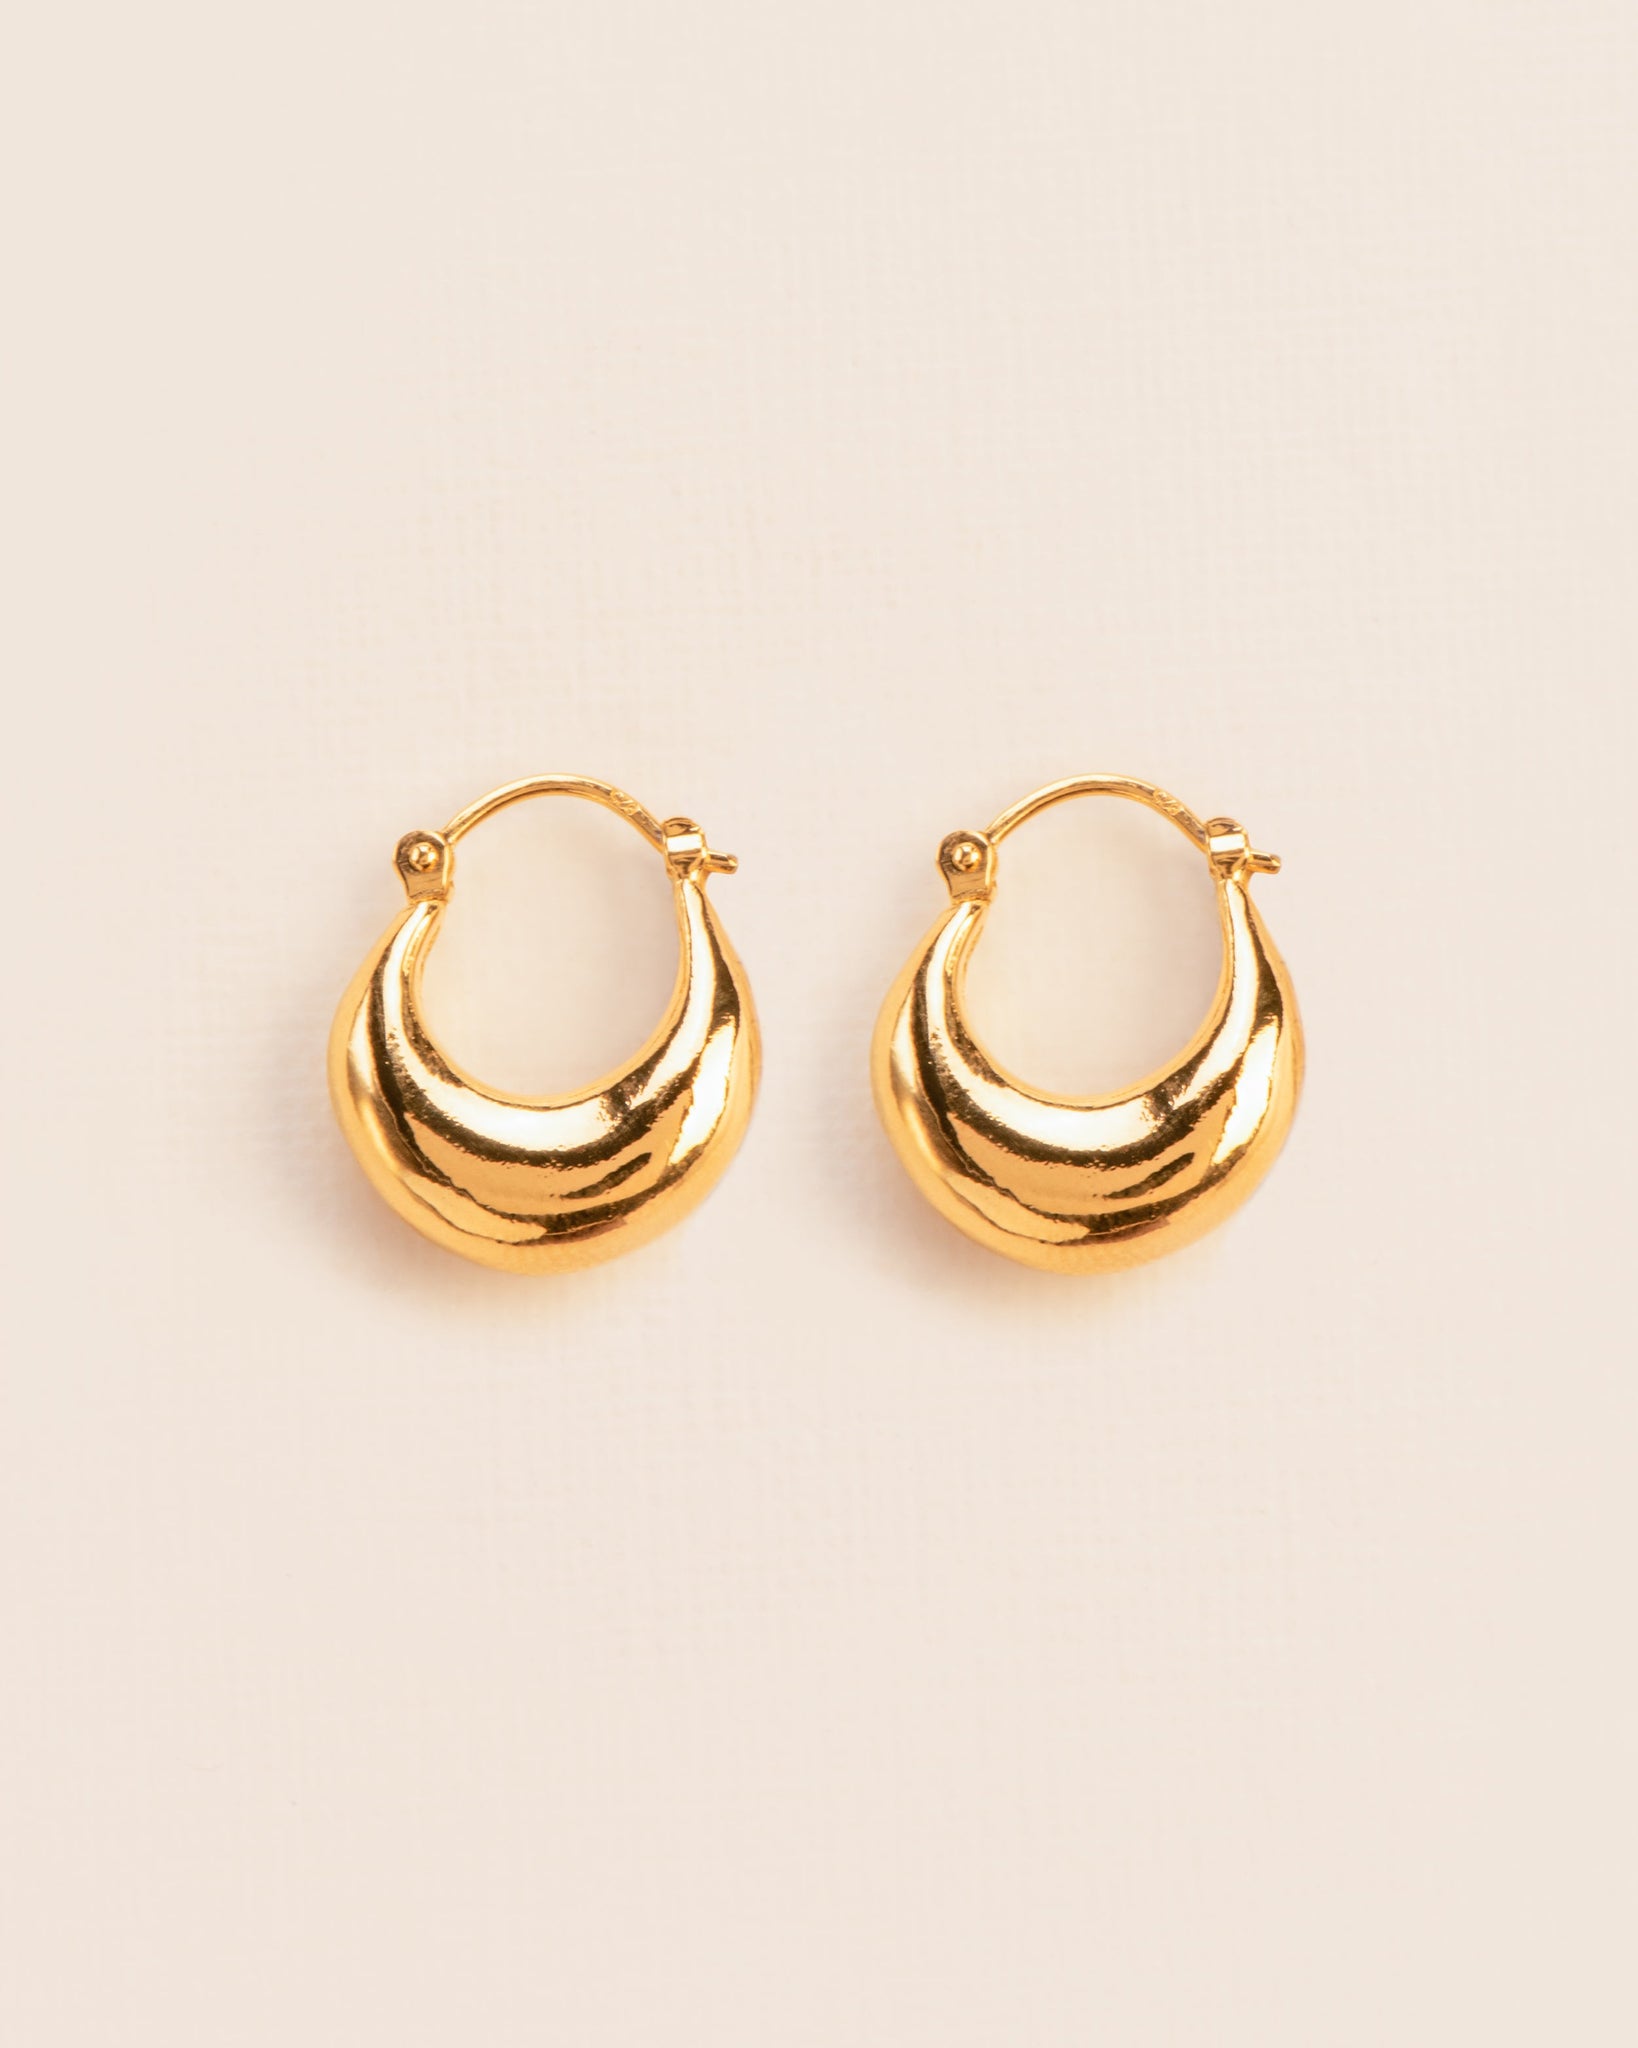  Wouters & Hendrix Hoops with clasp in goldpated silver still